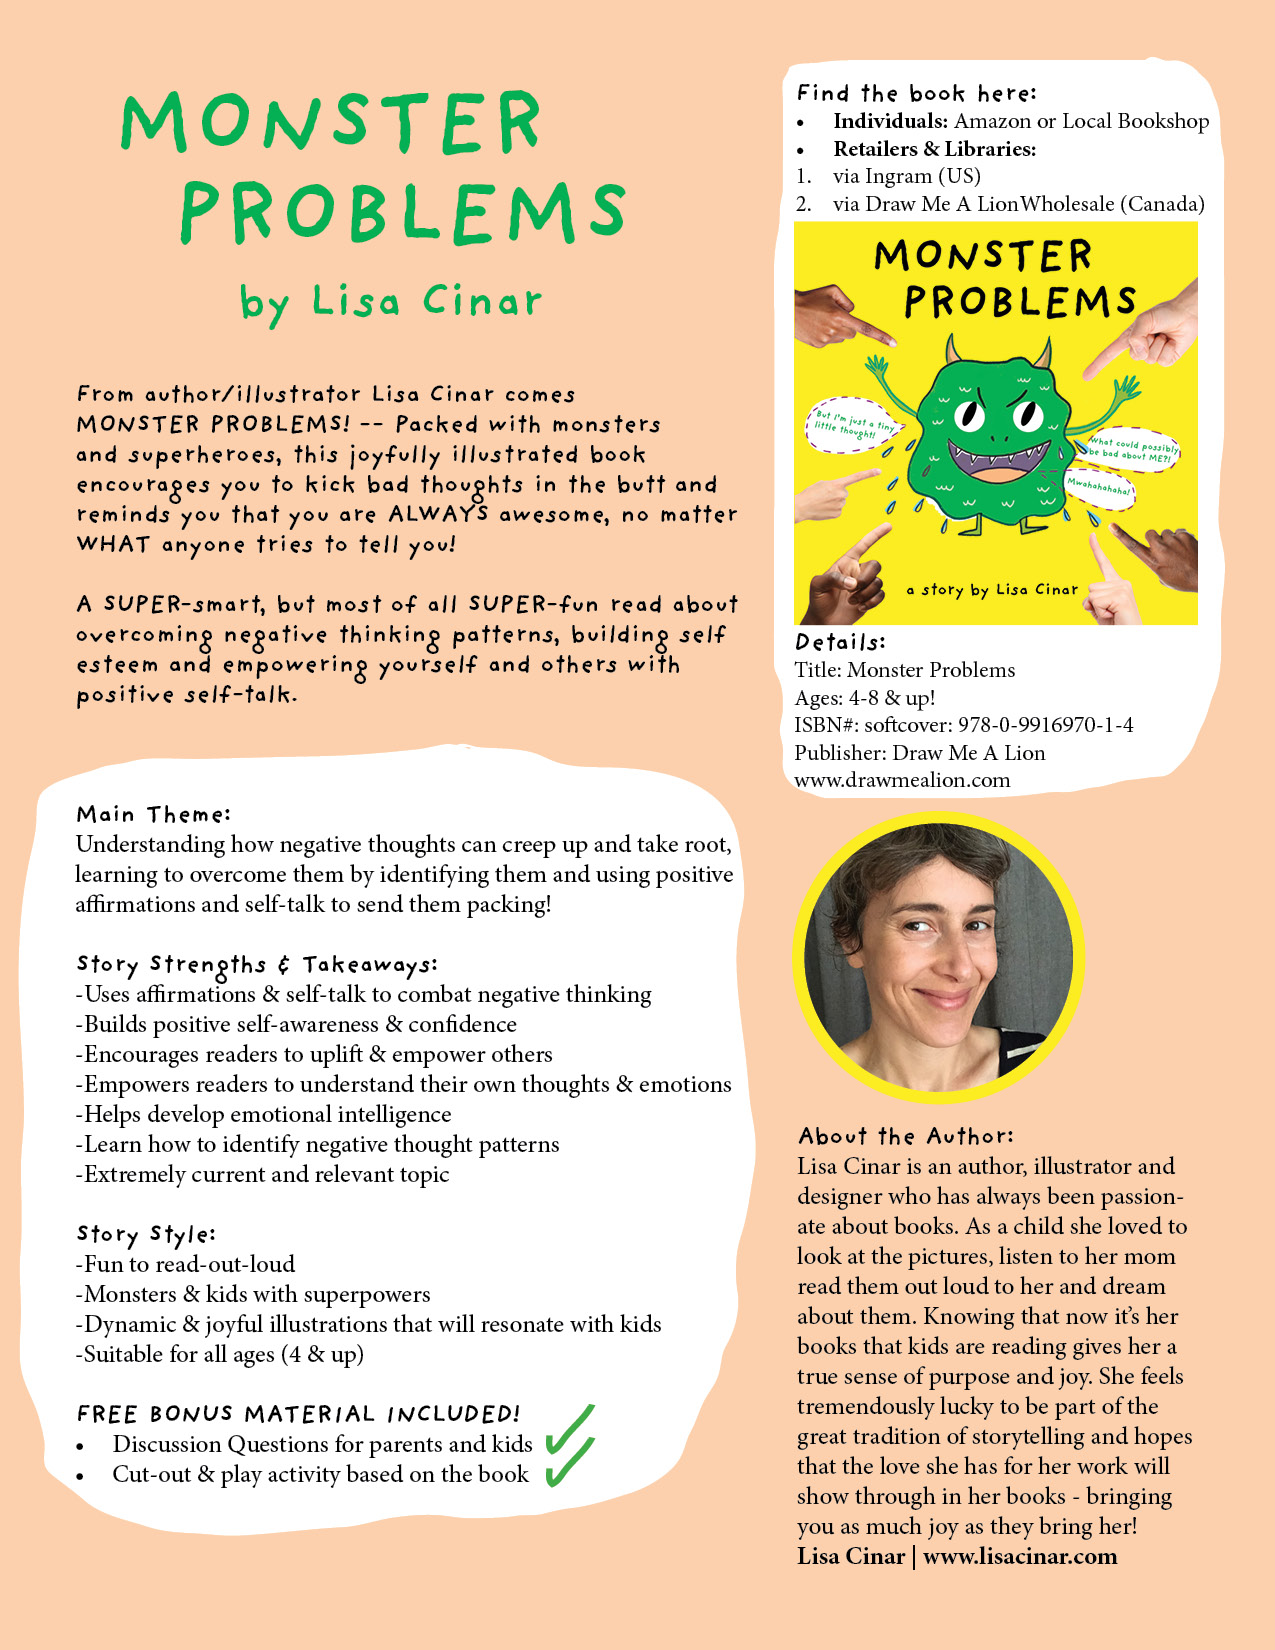 Monster Problems - Now Available via Amazon! 